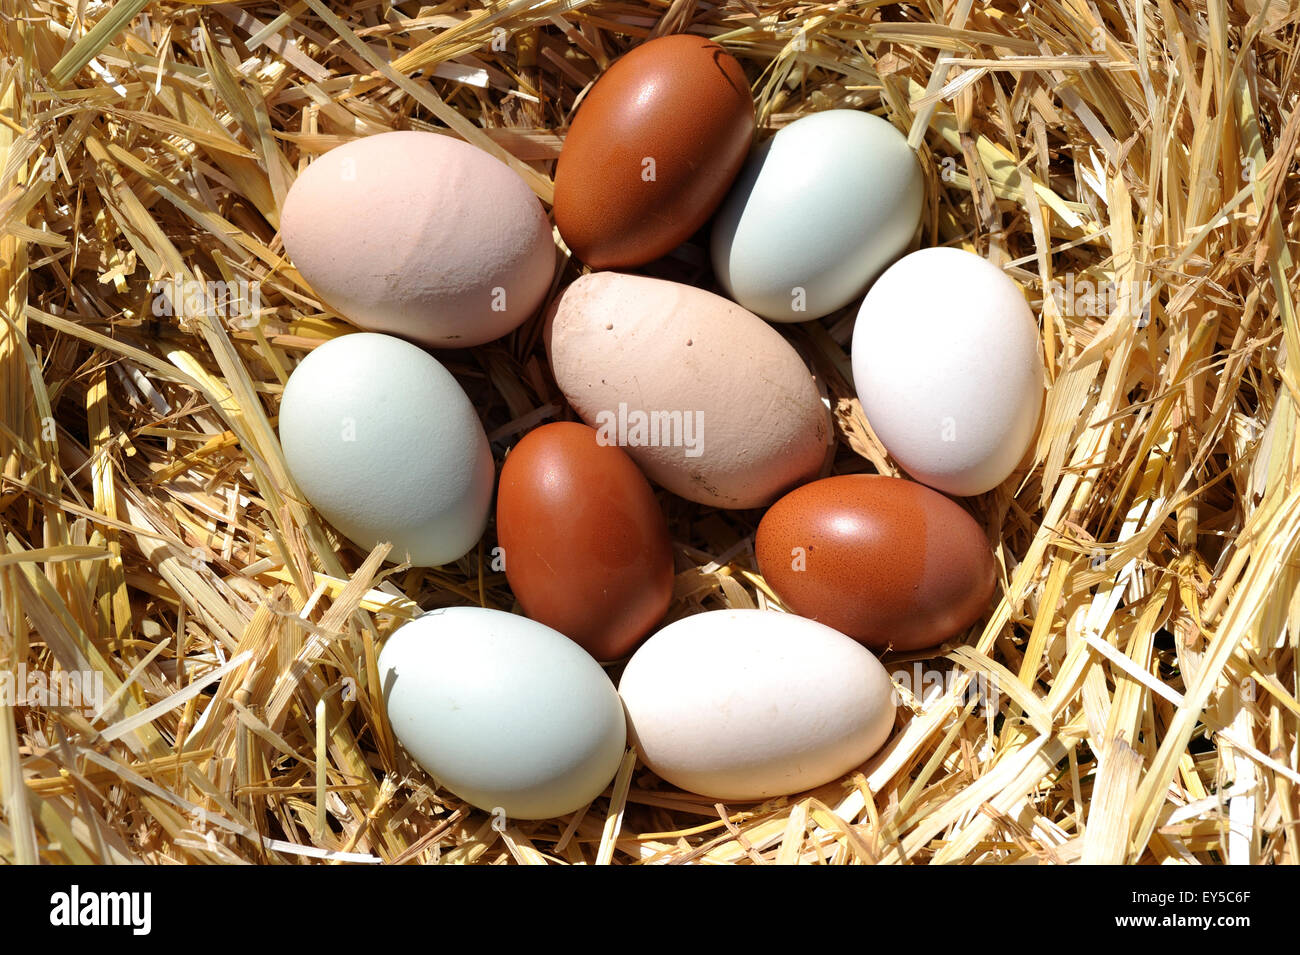 Eggs of different breeds of hens in the straw - France red: Marans breed aquamarine: Araucana breed white: Houdan breed pink: Isa Brown breed Stock Photo